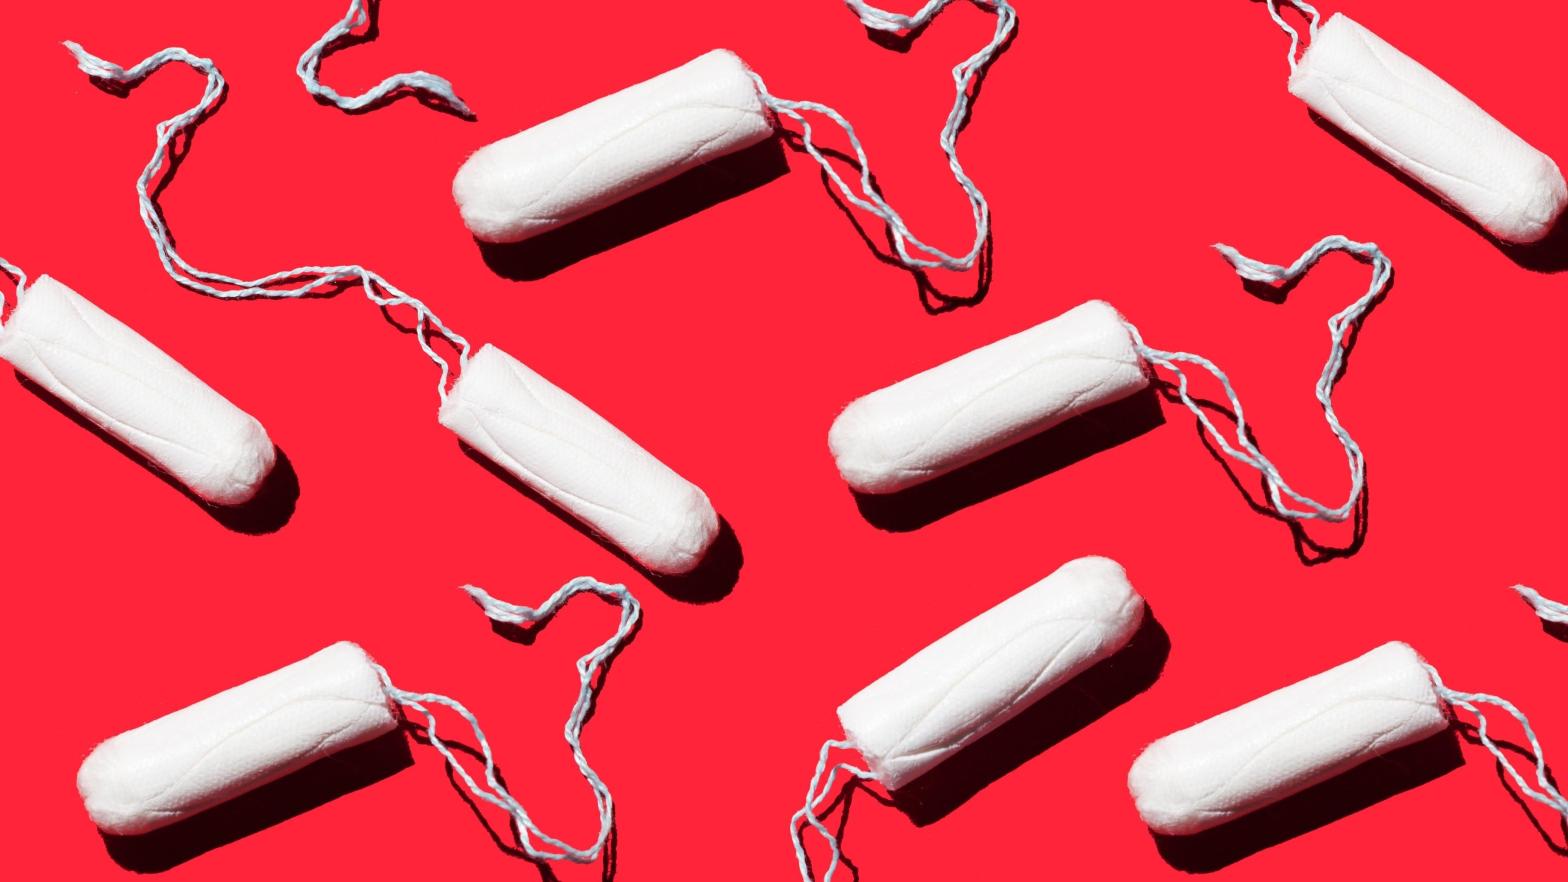 Don't listen to what people are saying on TikTok. Your tampons are safe. (Image: IKagadiy, Shutterstock)